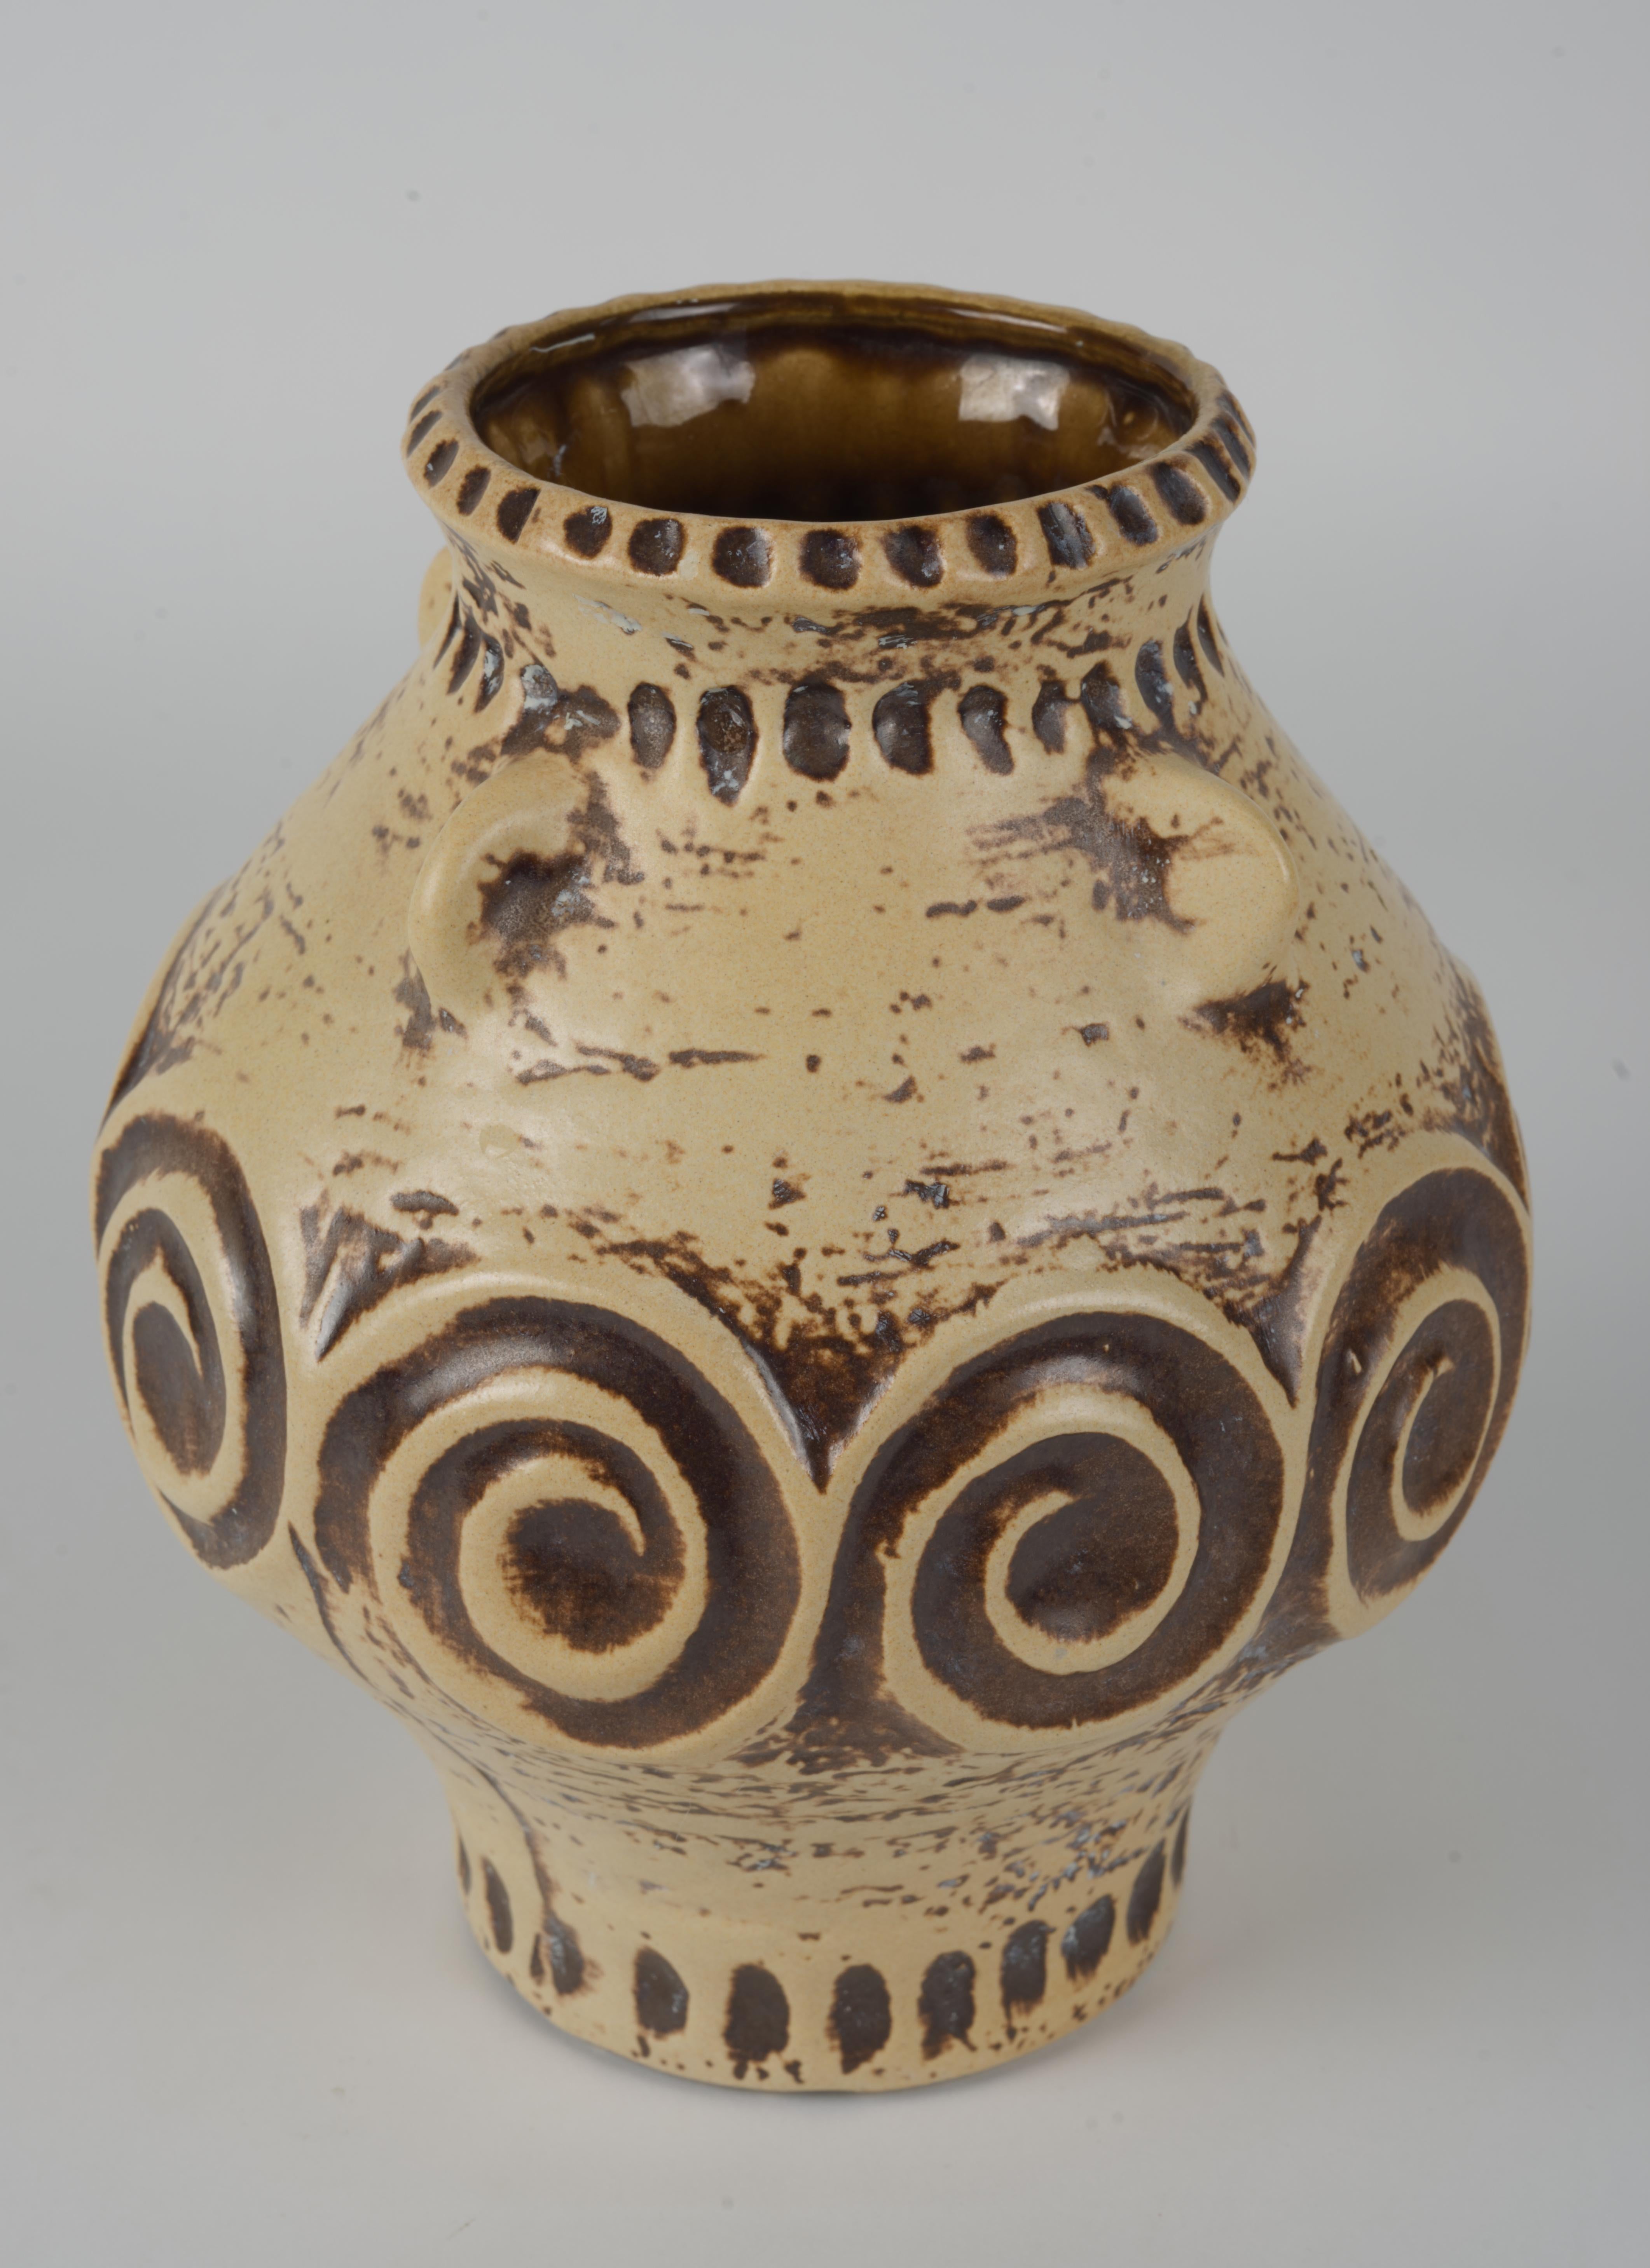  Jasba N3221120 vase is a part of N series of objects; this series covers a large segment of Jasba’s production. Items within the series come in a wide variety of forms and decors, and in many cases, designs were retired after a year and replaced by